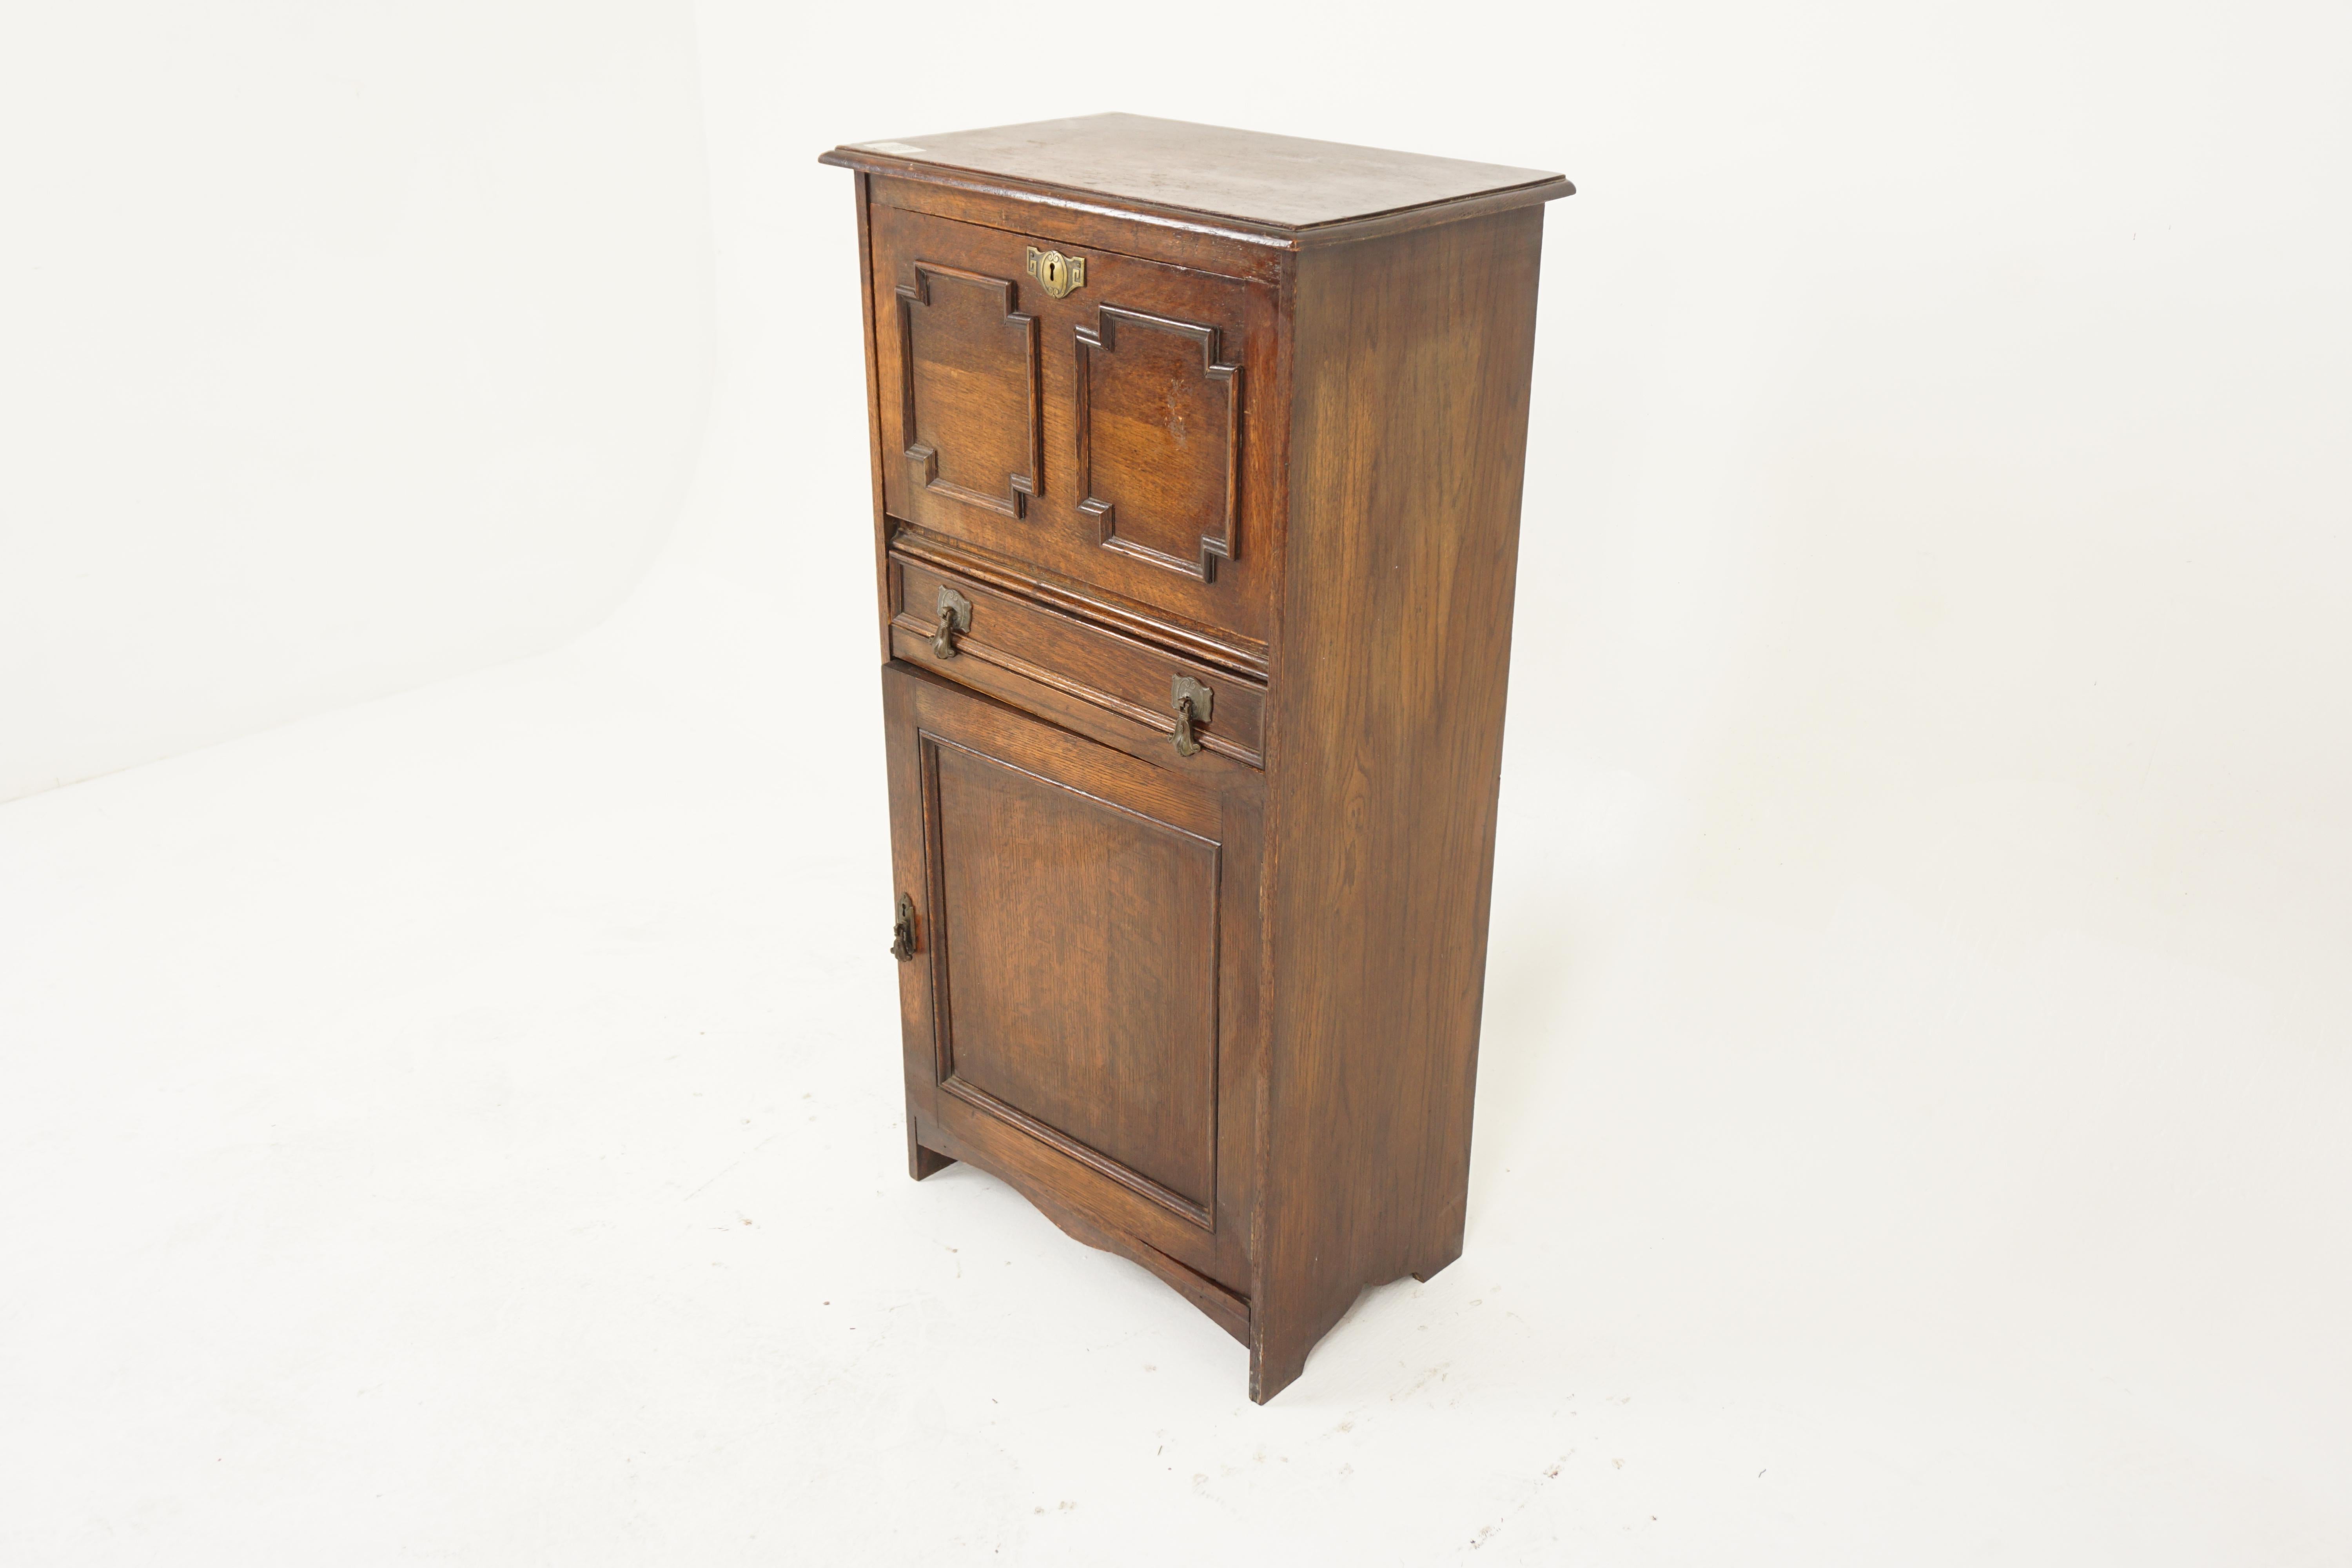 Vintage Oak Desk, Writing Table, Cabinet, Scotland 1925, H993

Scotland 1925
Solid Oak
Original Finish
Rectangular moulded top
Panelled drop front door opens to reveal writing surface with open cupboards
Single dovetailed drawer below with original